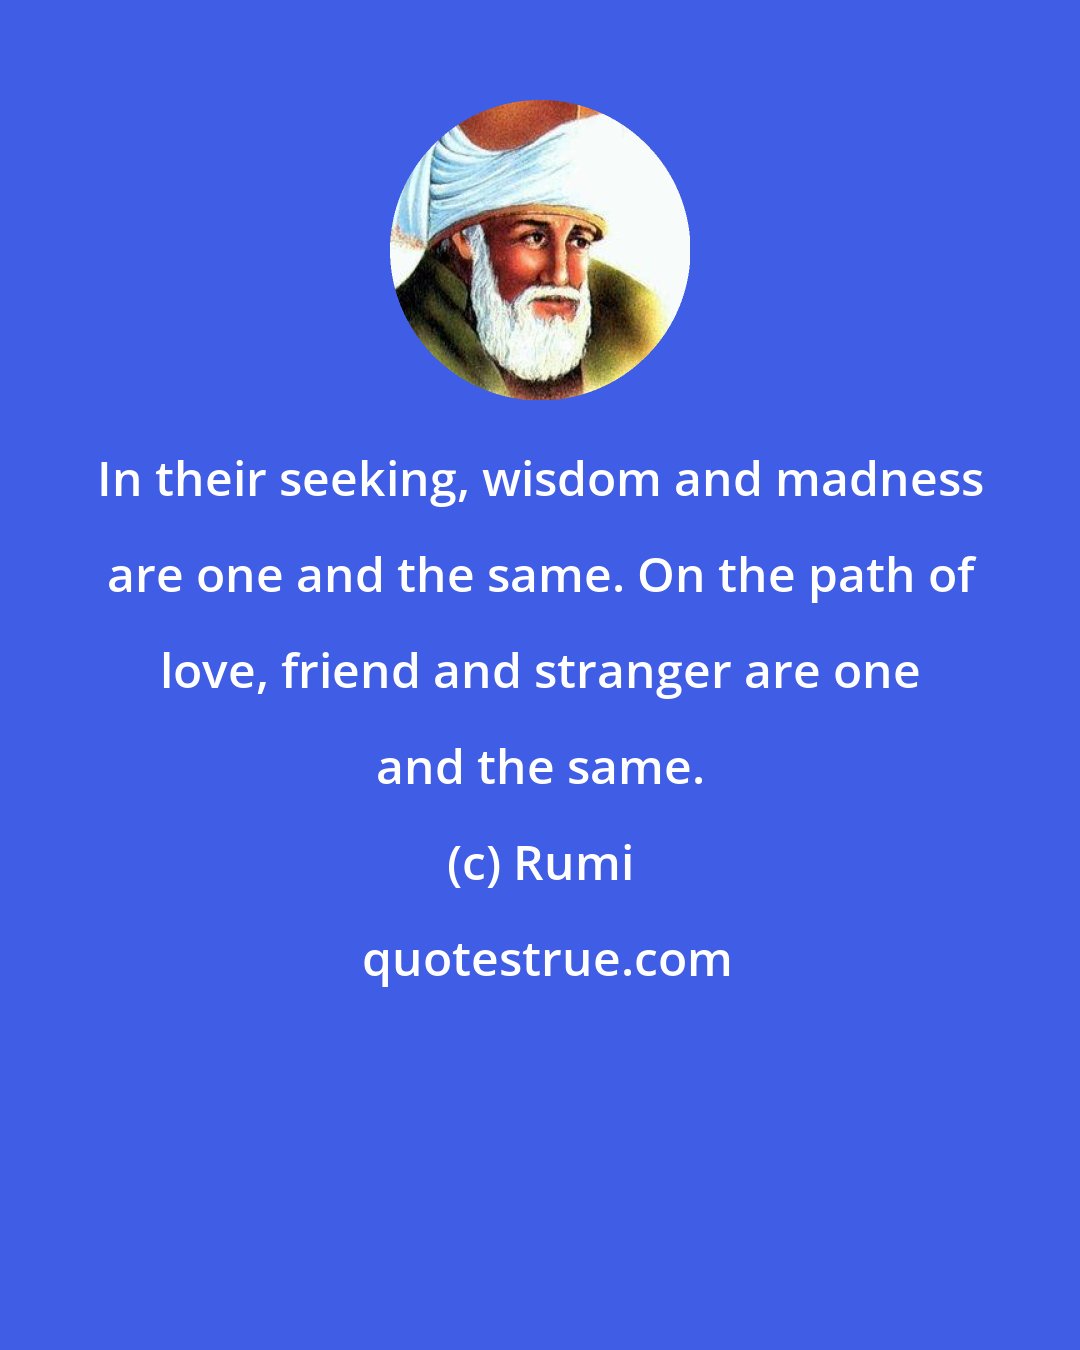 Rumi: In their seeking, wisdom and madness are one and the same. On the path of love, friend and stranger are one and the same.